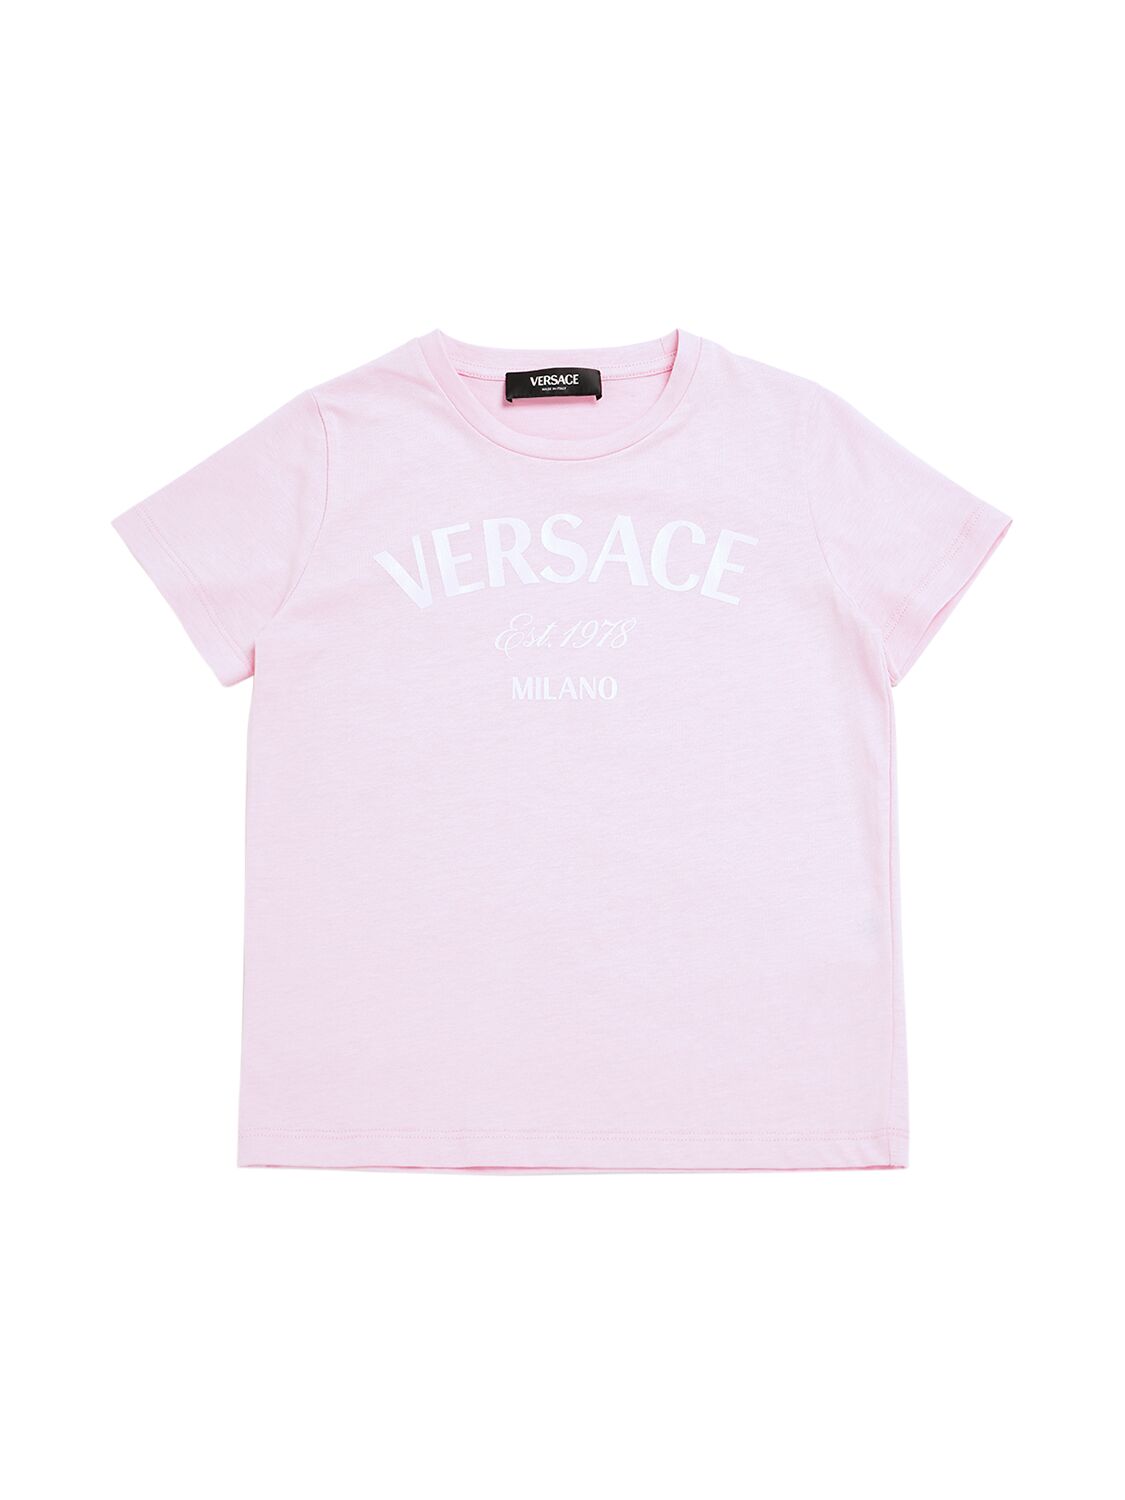 Versace Kids' Printed Cotton Jersey T-shirt In Pink